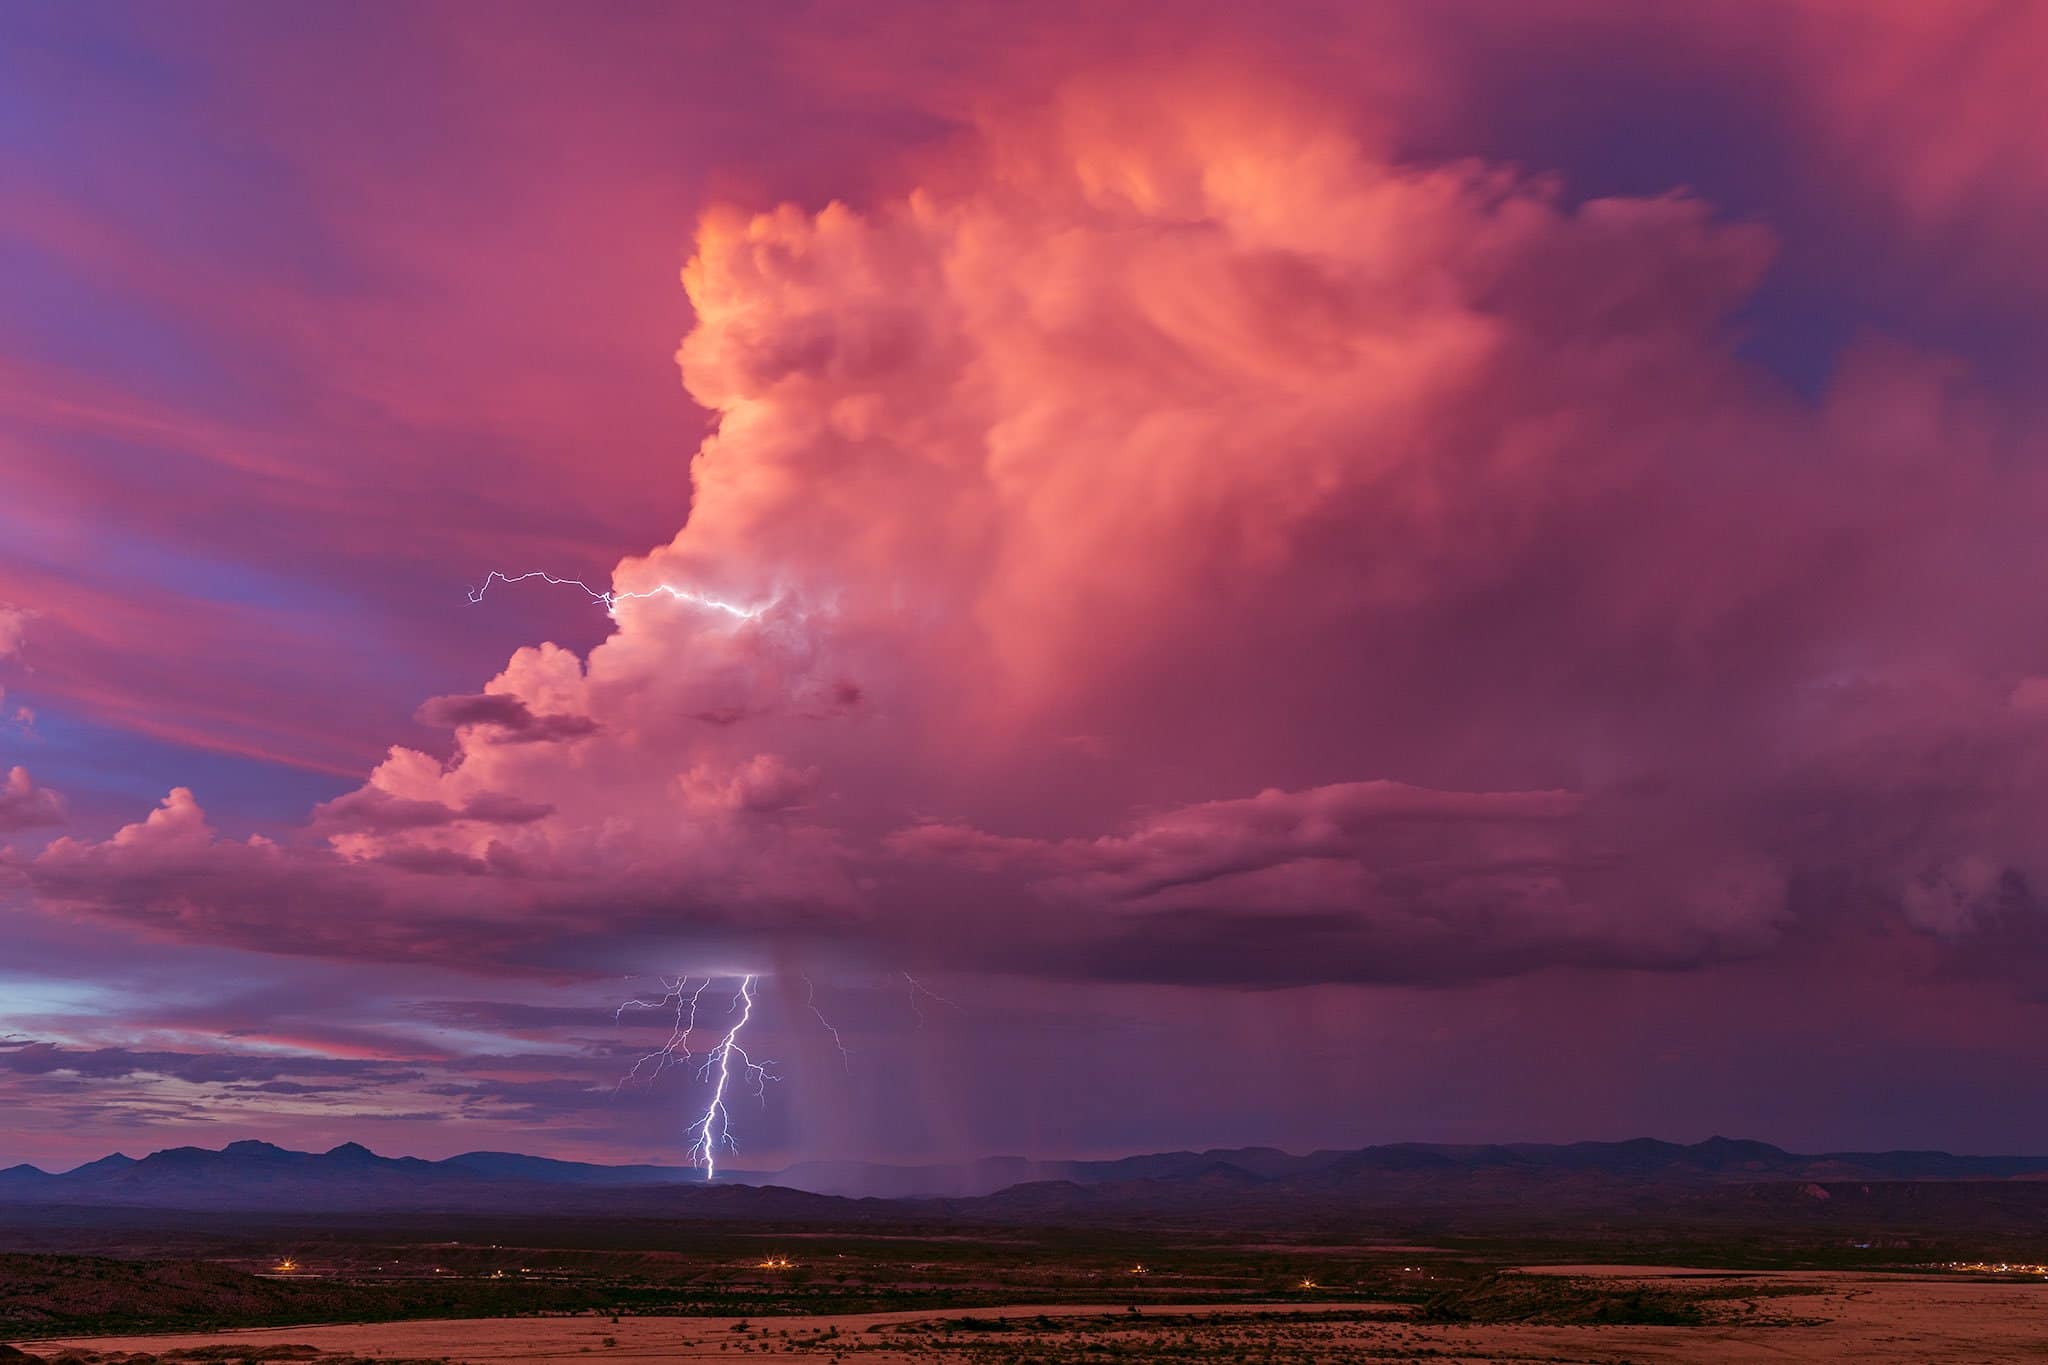 An isolated storm put the finishing touches on a spectacular monsoon sunset in San Carlos by John Sirlin @SirlinJohn